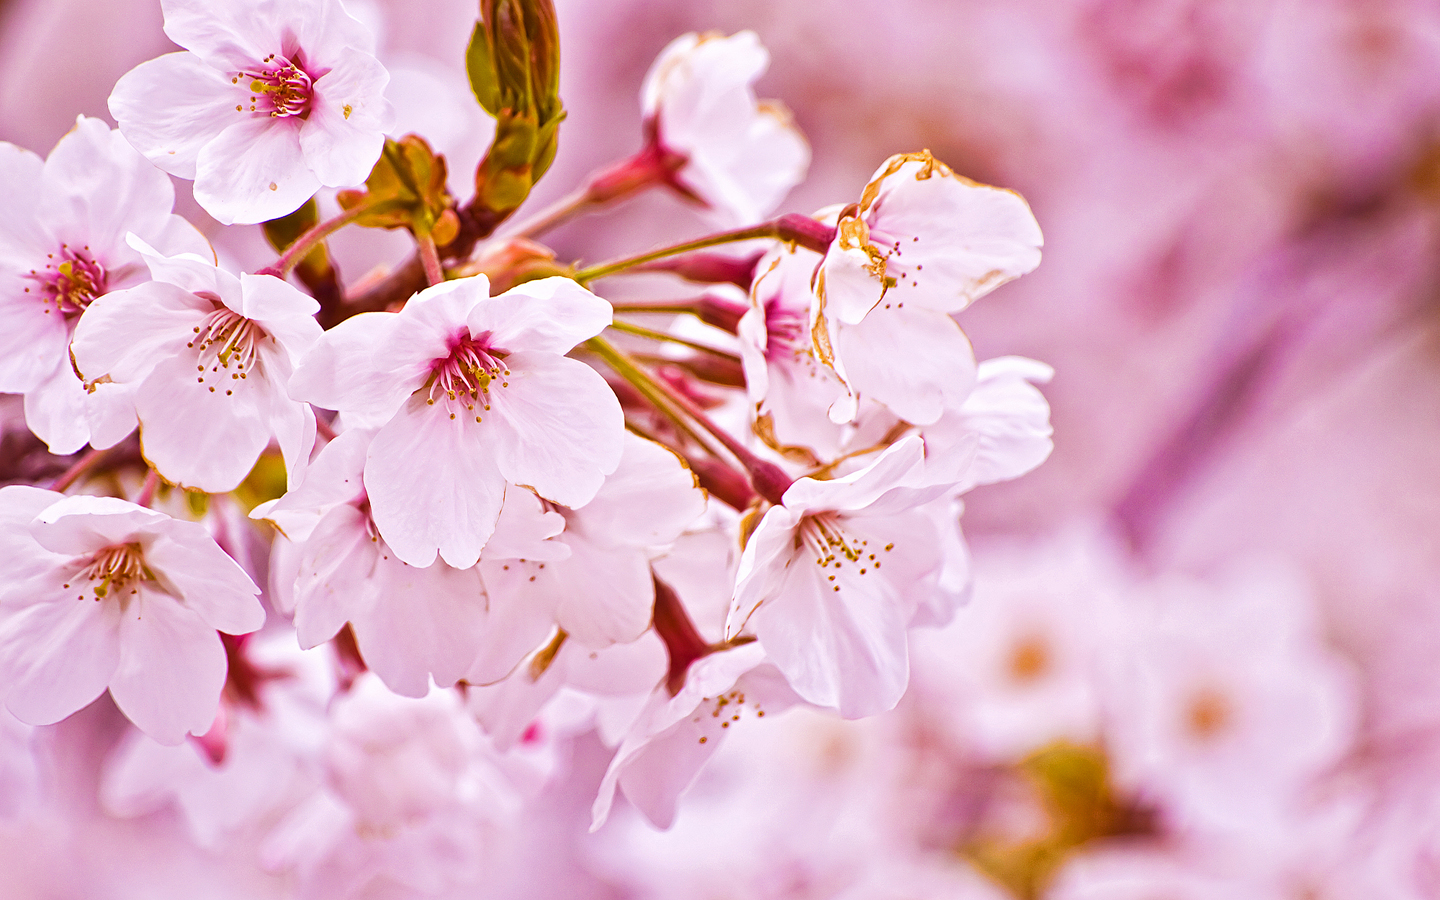 Cherry Blossom Free PPT Backgrounds for your PowerPoint Templates